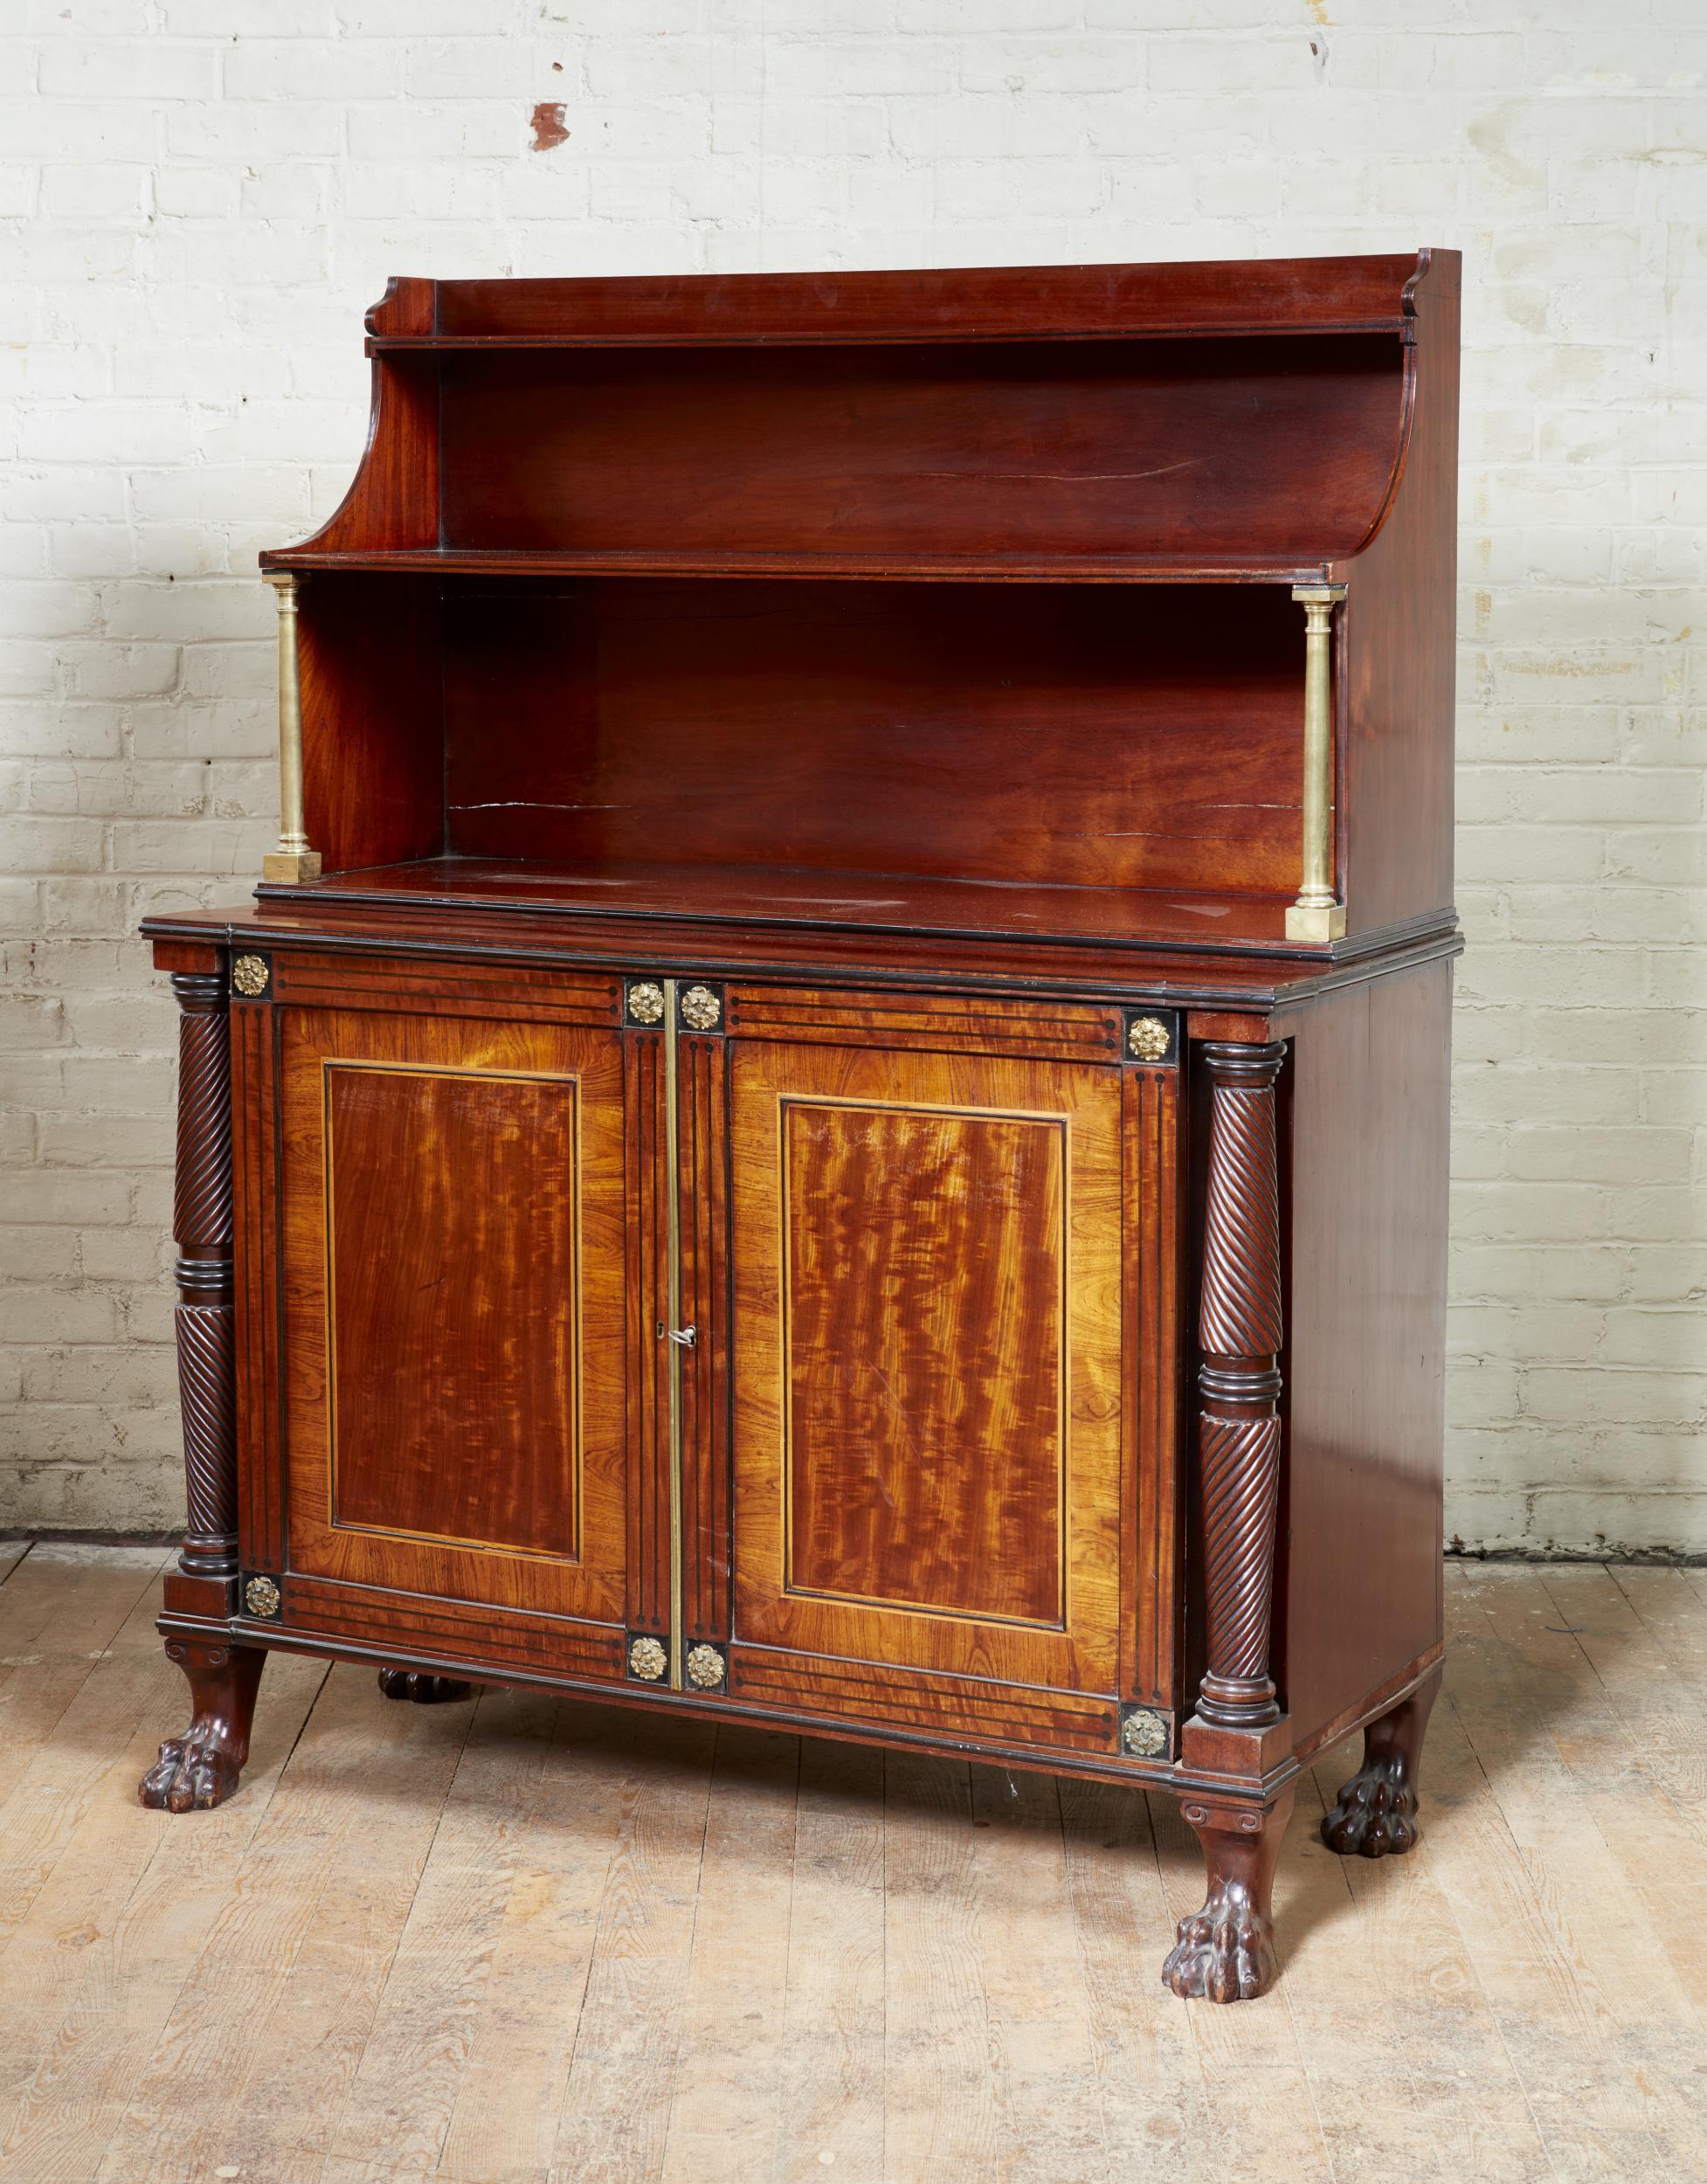 Very fine late Georgian inlaid mahogany and bronze mounted chiffonier, having three tier waterfall bookshelf top supported by bronze columns, over two gilt bronze mounted paneled doors with ebony and satinwood inlay, with kingwood banded beeswing